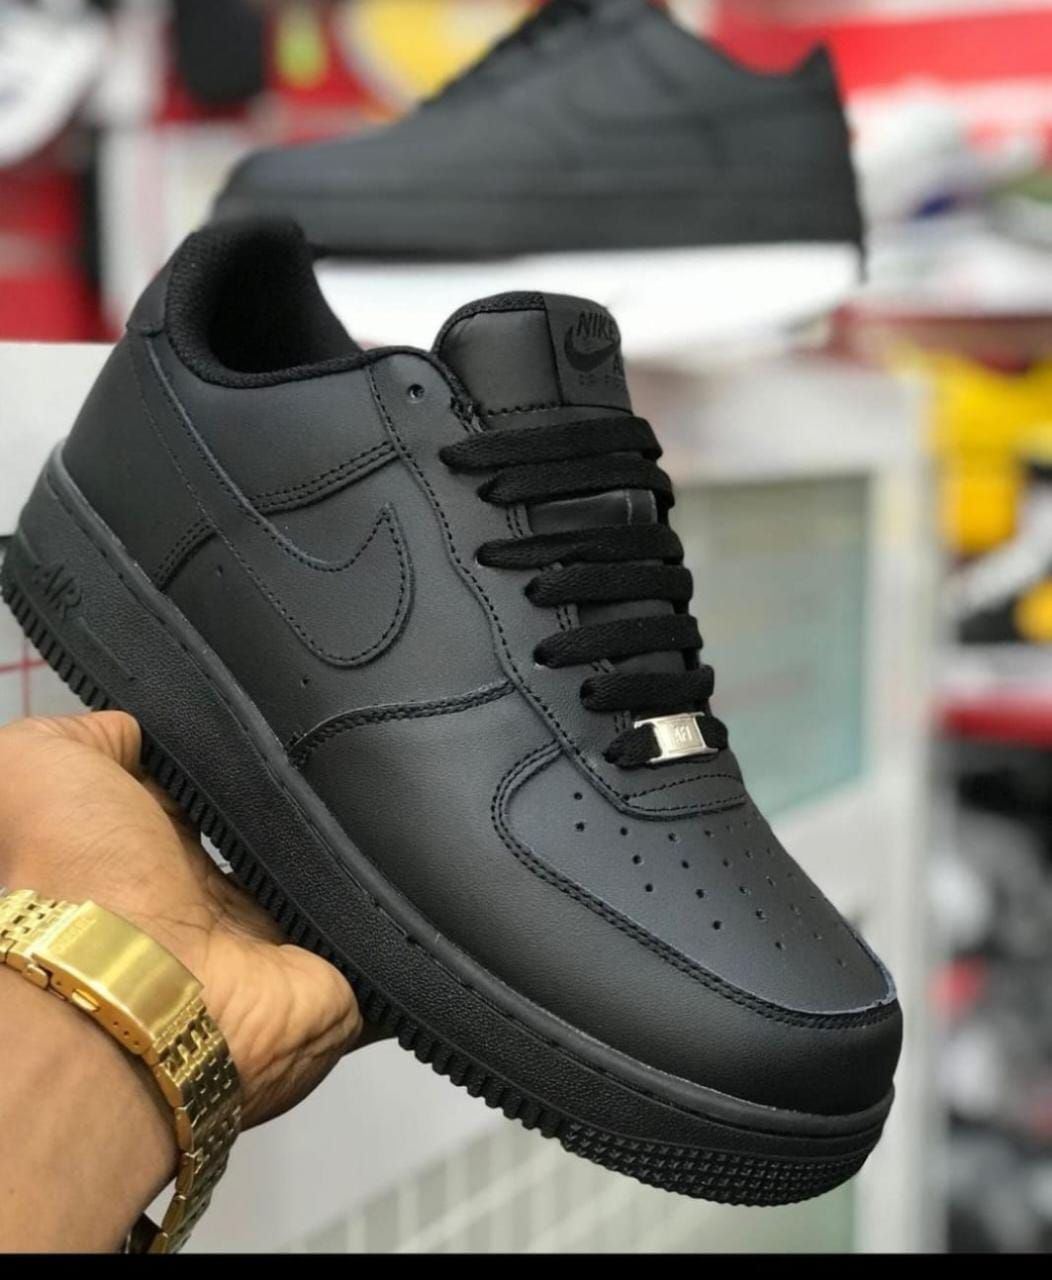 Nike shoes: 10 ways to know if you're buying fakes in Nigeria - Pulse ...